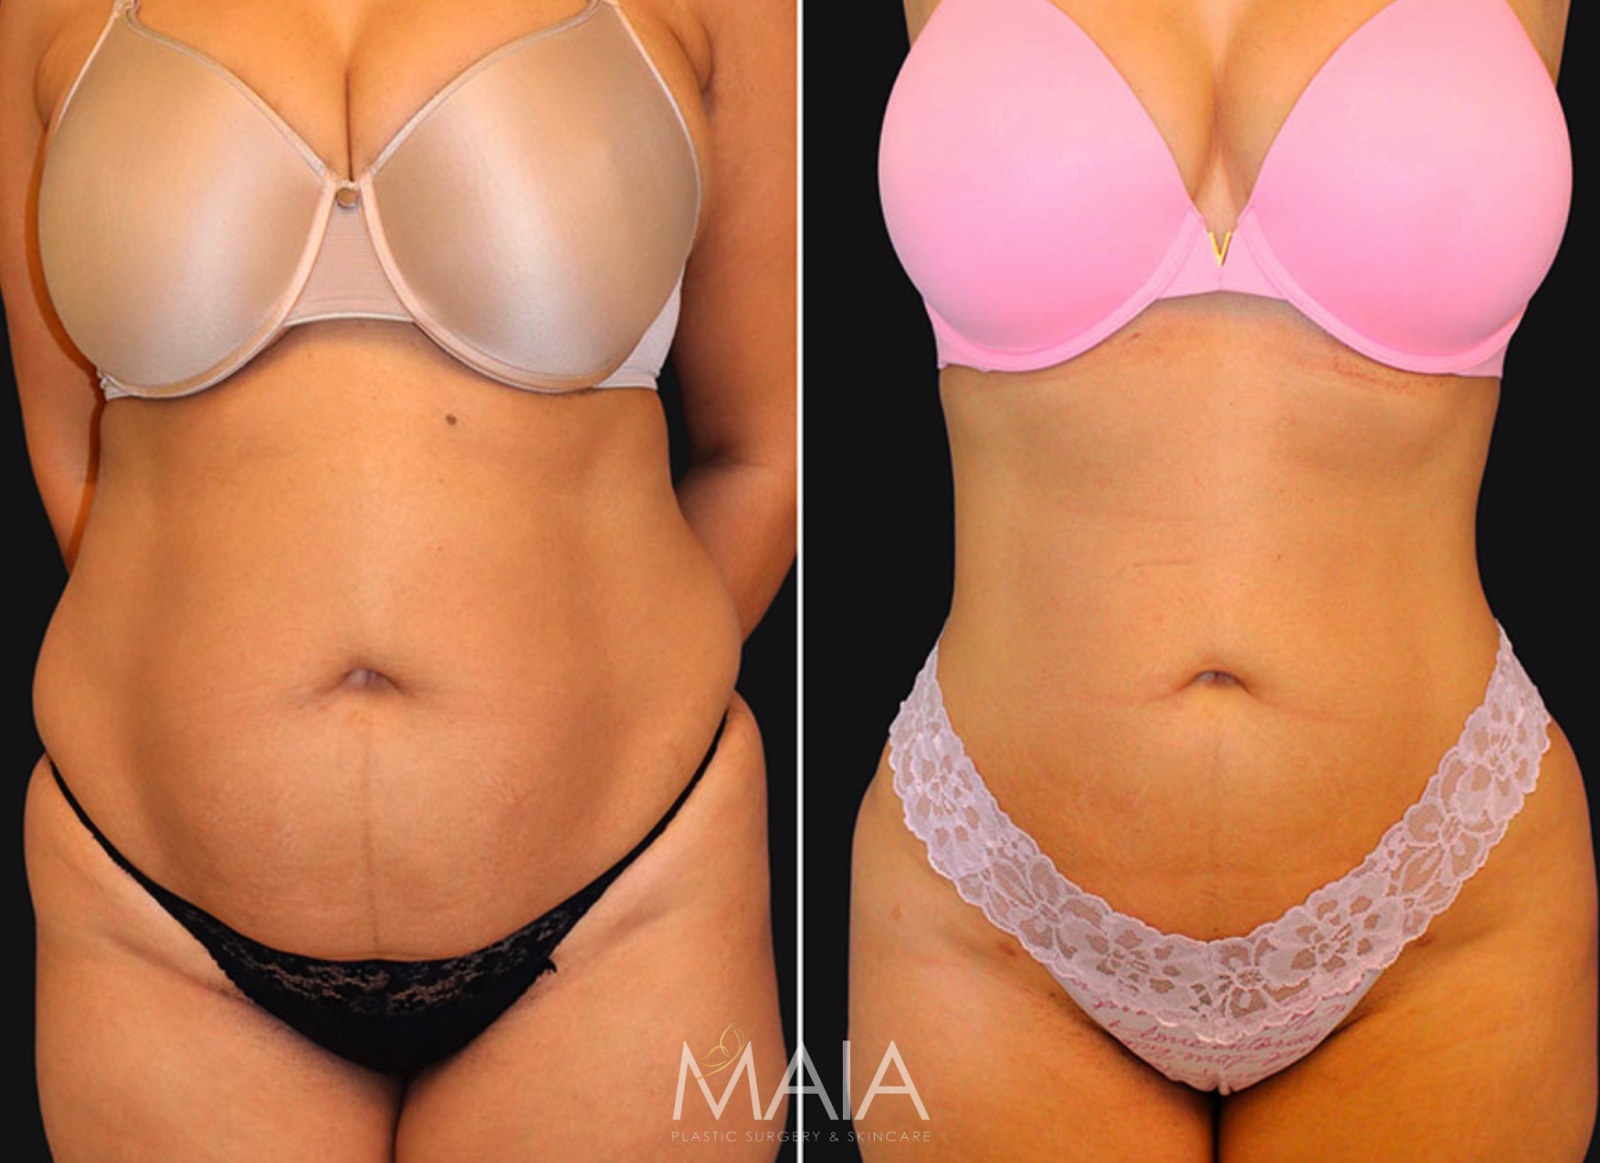 Learn the Difference Between BodyTite and Tummy Tuck